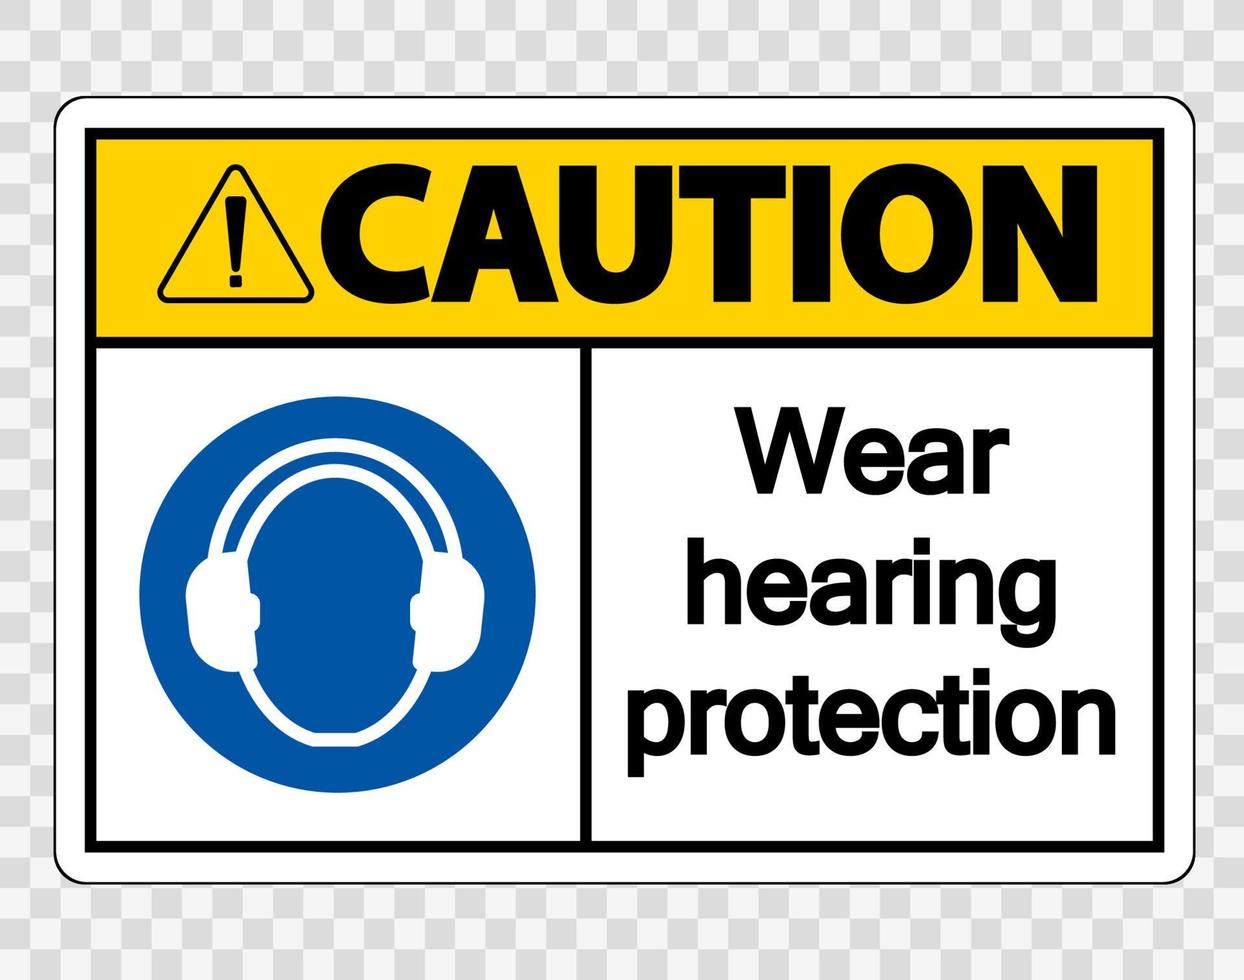 Caution Wear hearing protection on transparent background vector